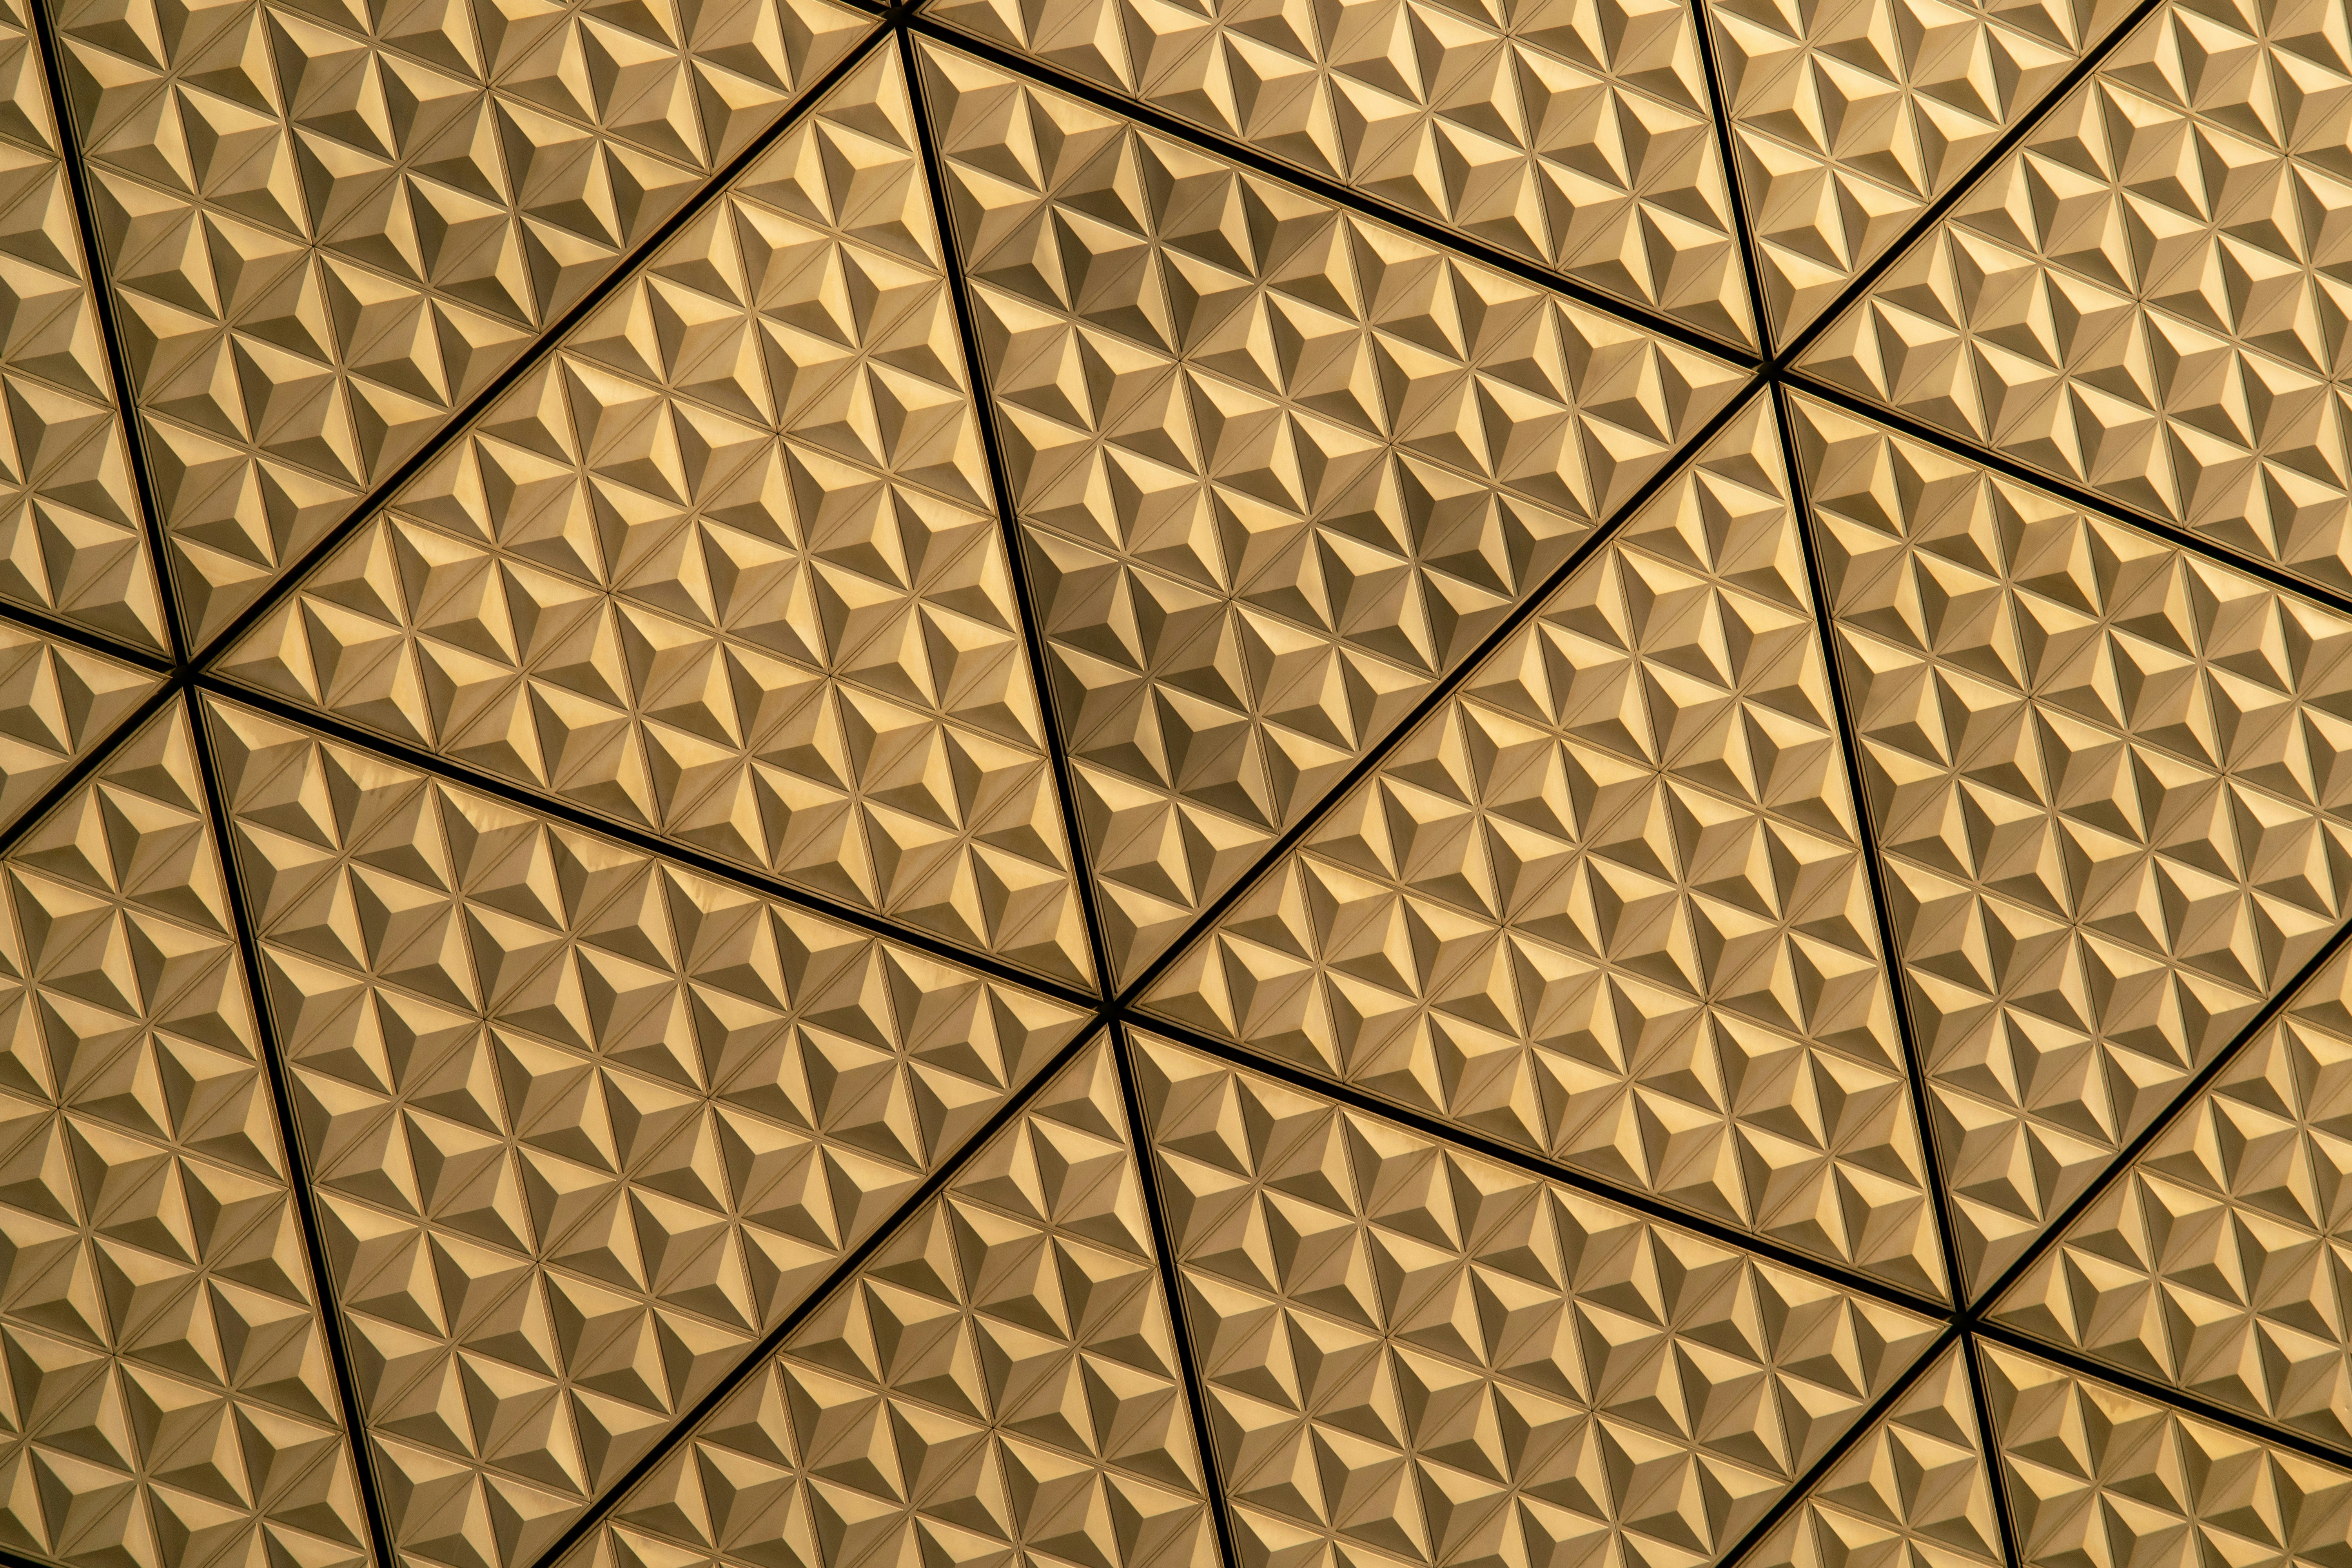 Tessellated tiles on the walls of Tokyo Big Sight